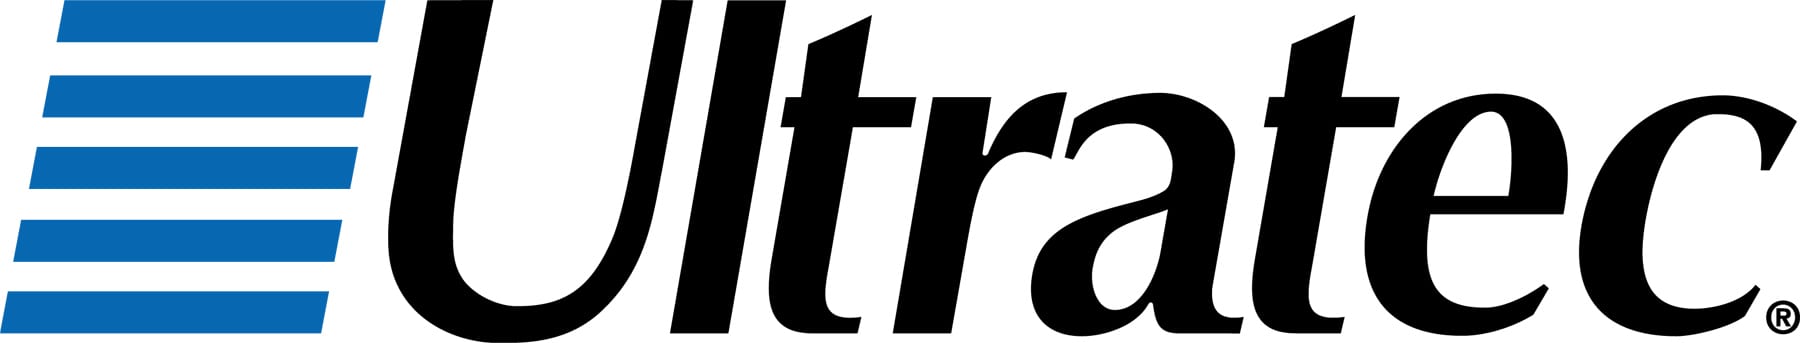 (Ultratec logo) Design representing 5 blue stacked bars. Followed by company name in black: ULTRATEC